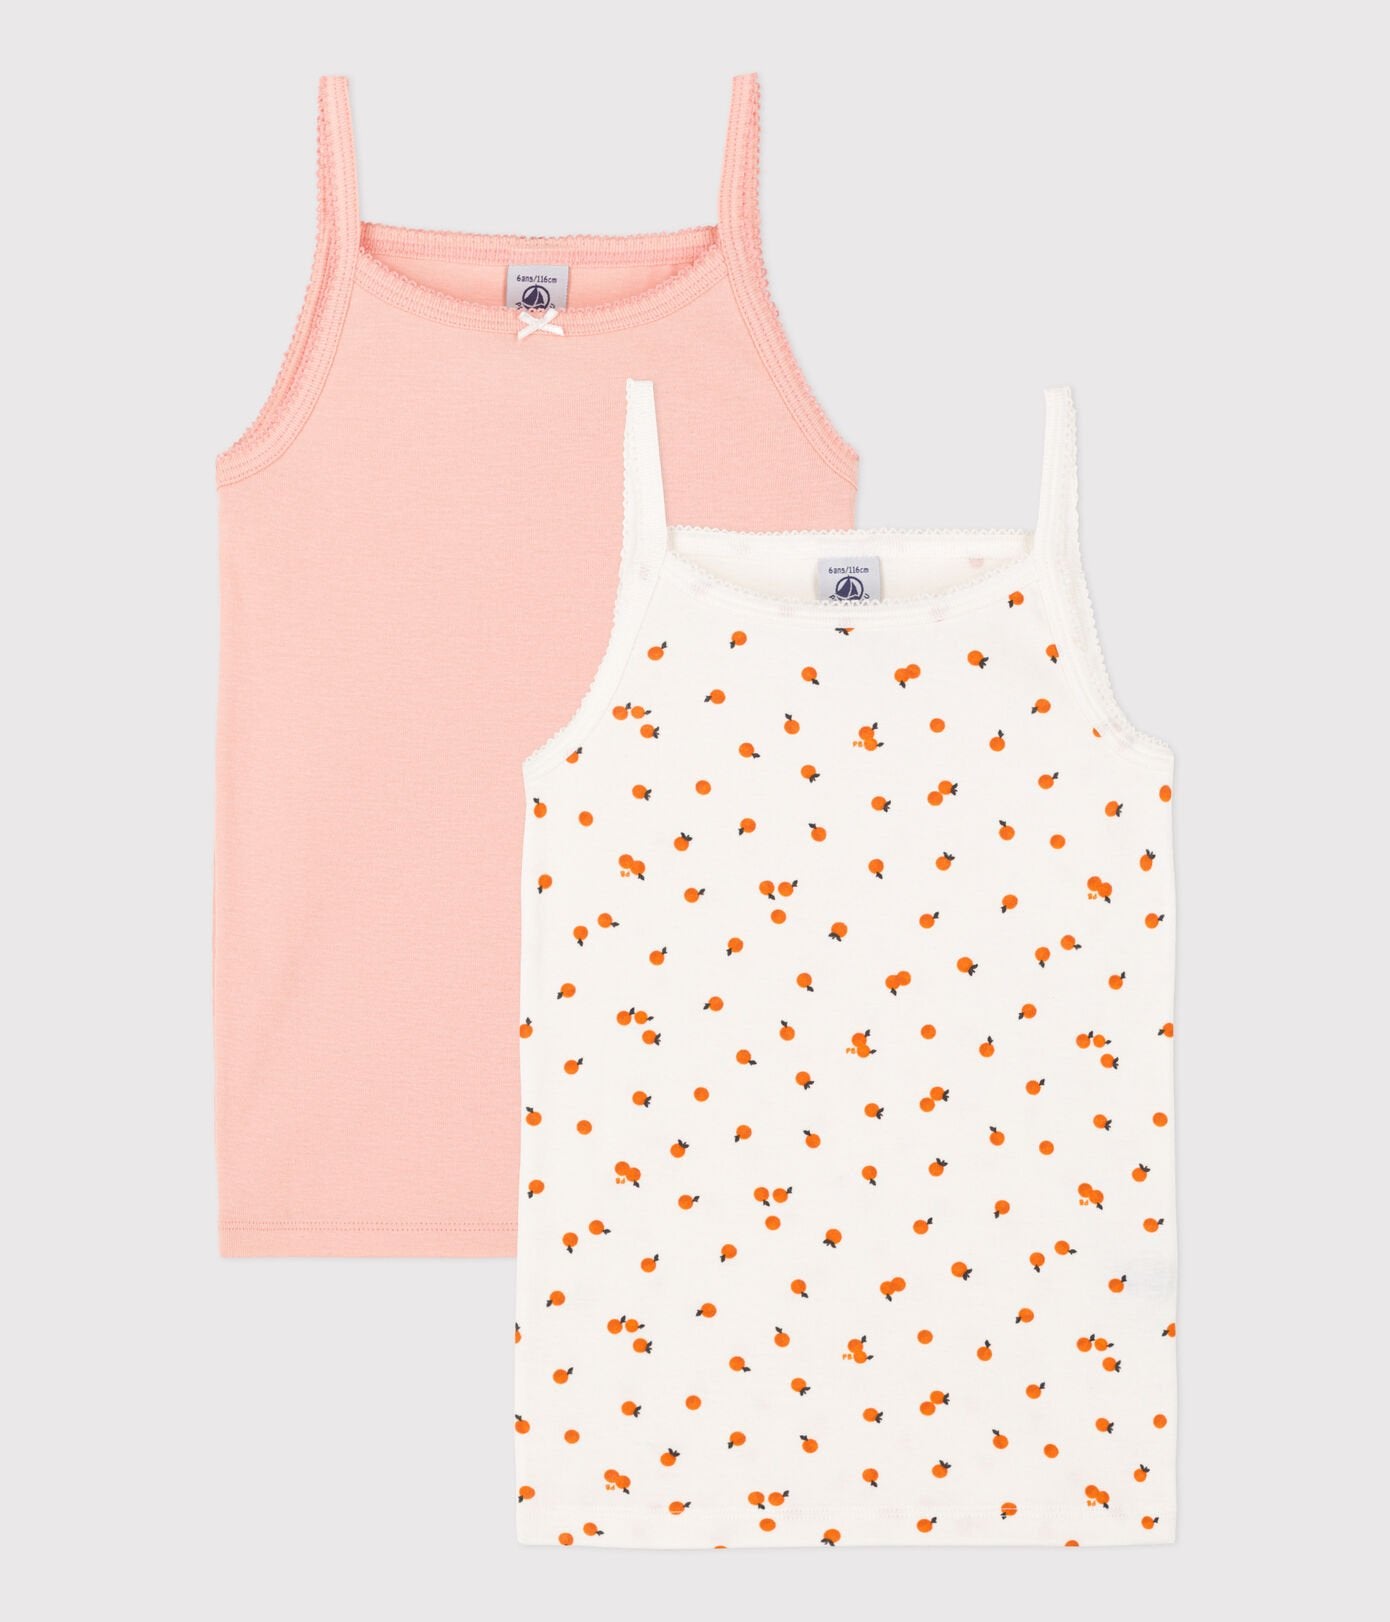 Pack of 2 Printed Sleeveless Tops for Girls - pale pink, Girls